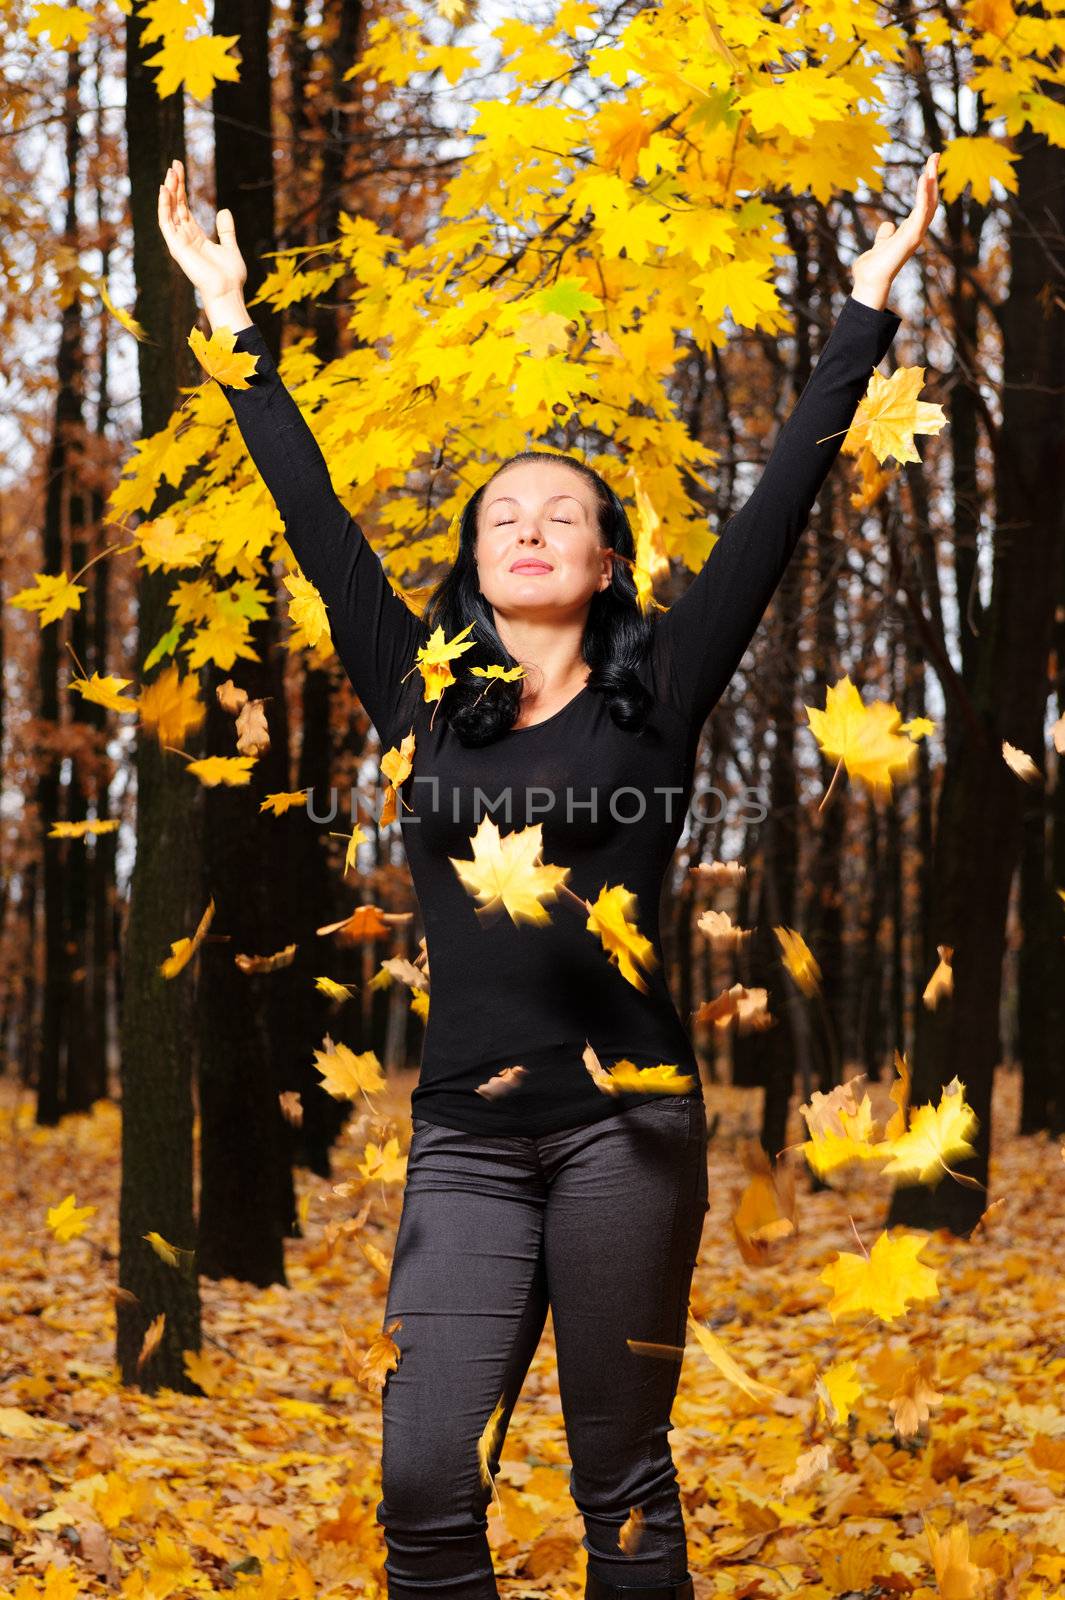 The women with the lifted hands autumn forest by galdzer